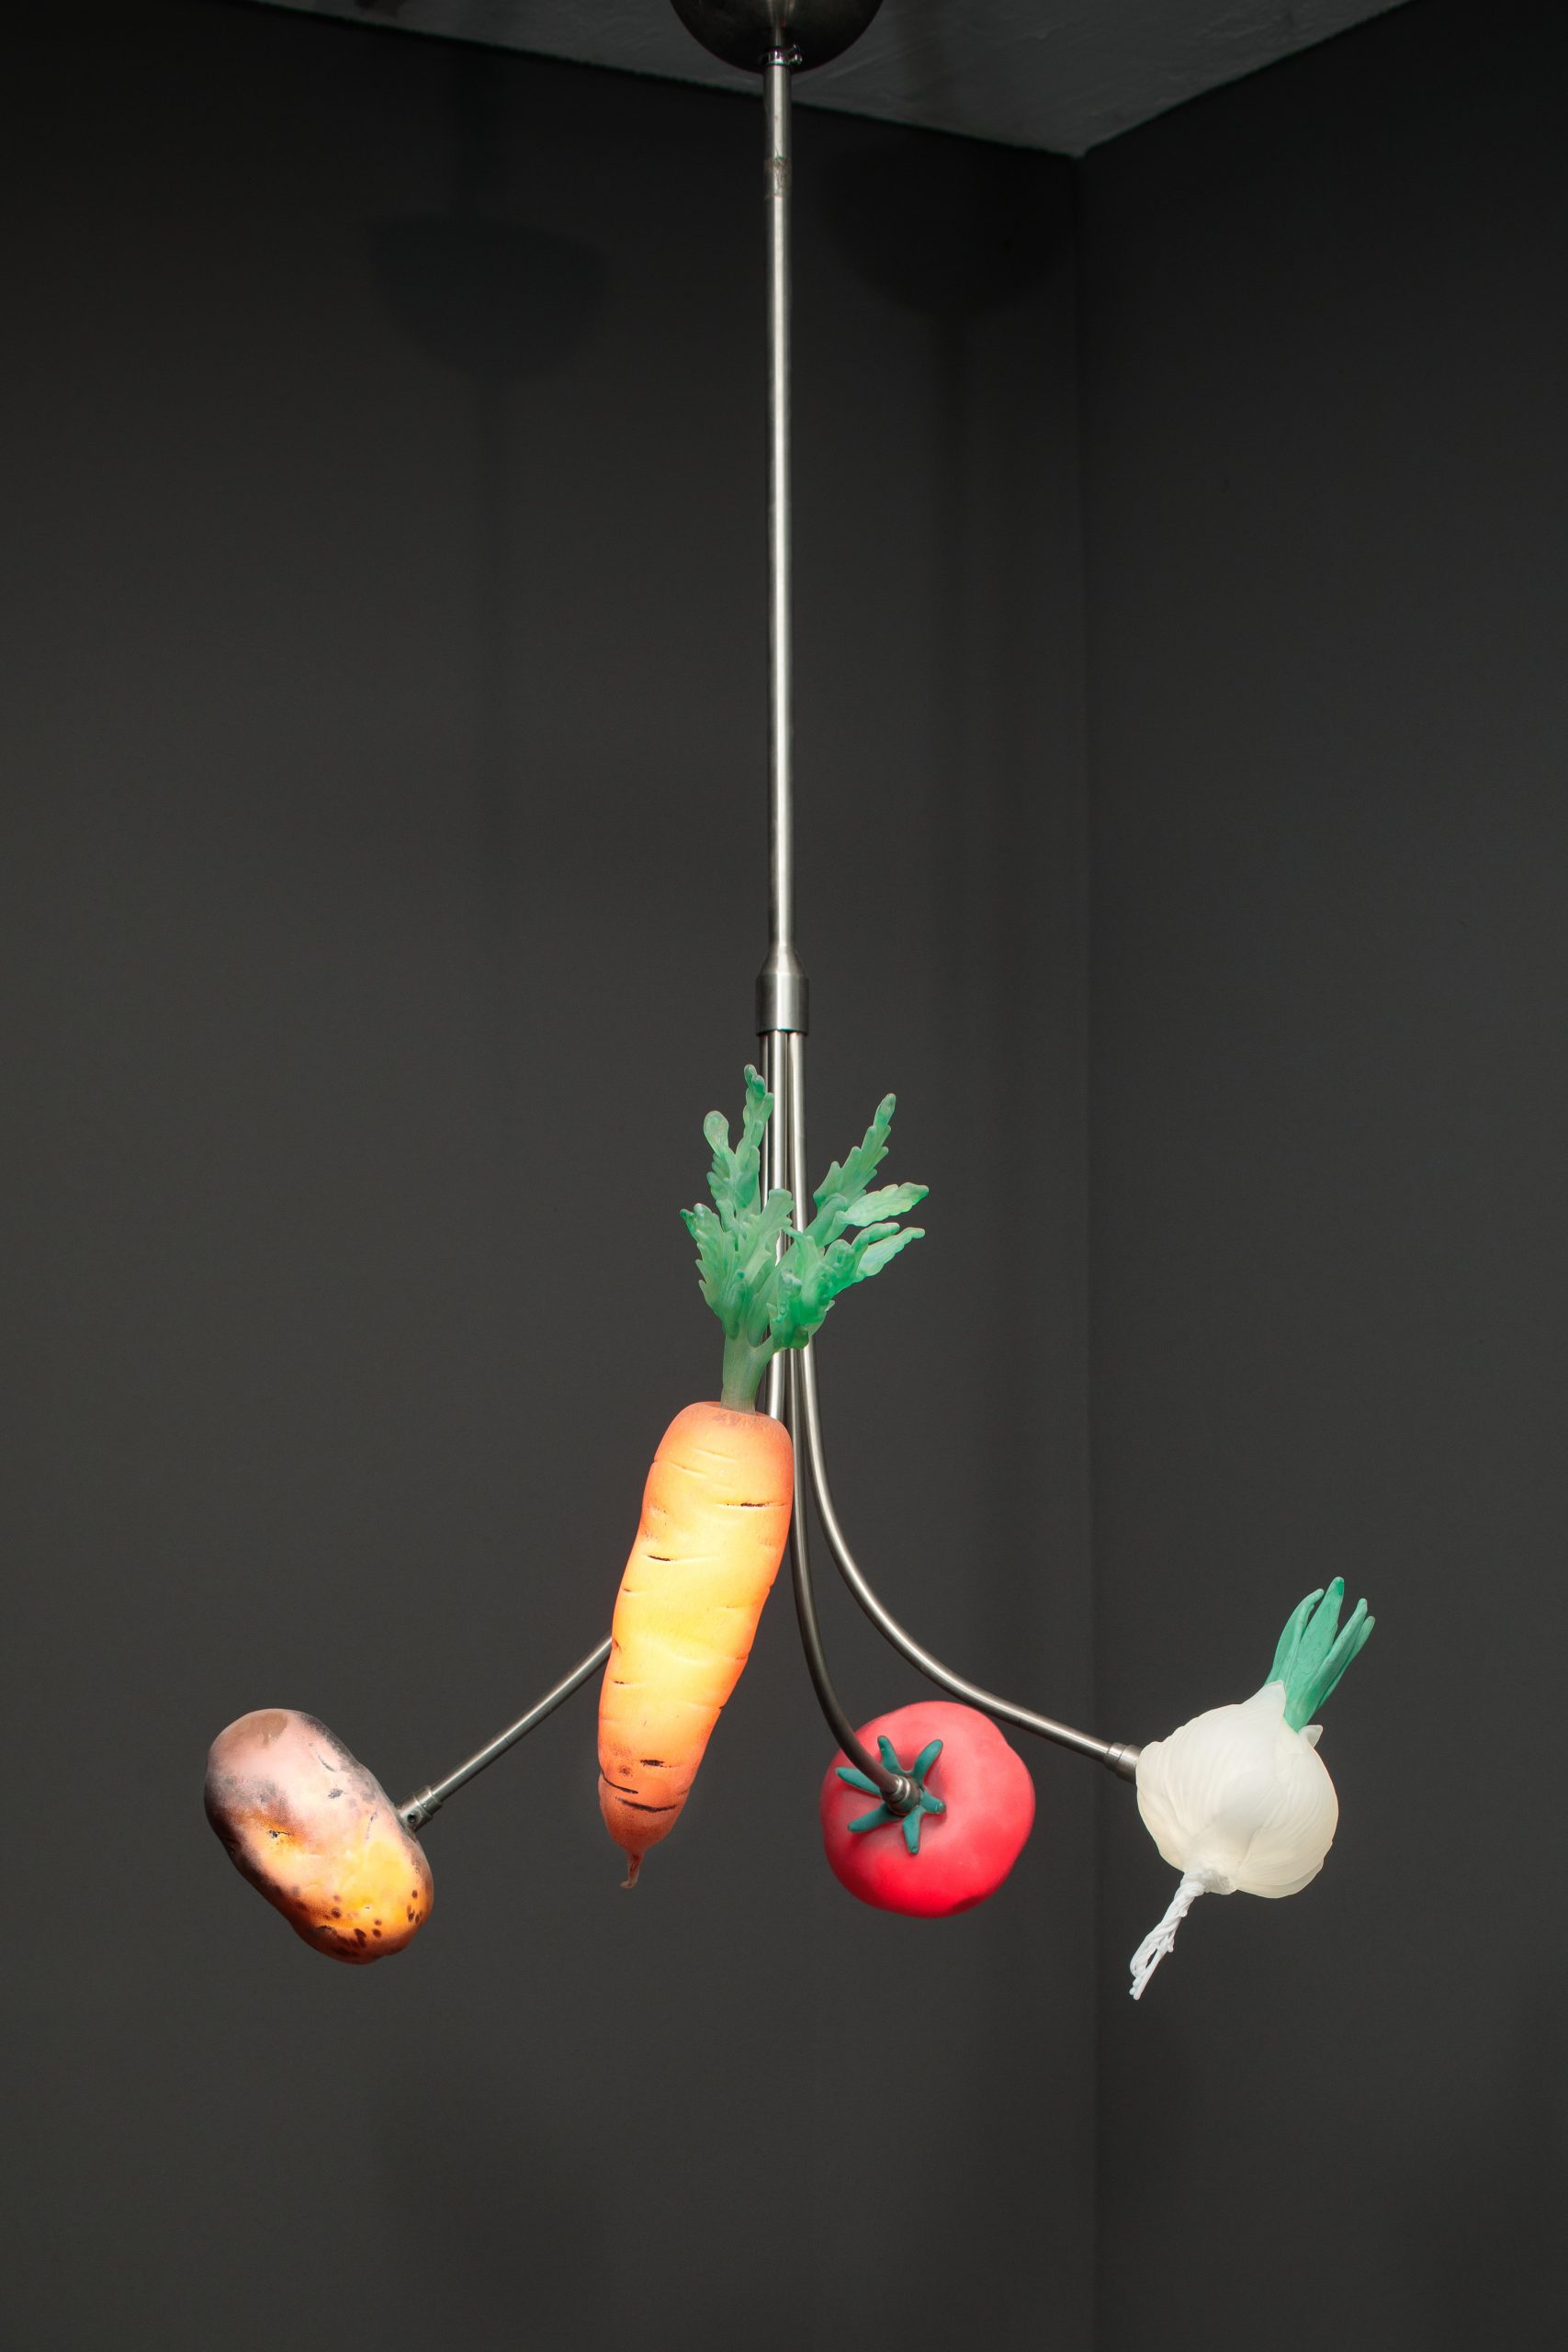 Laure Prouvost's Vegetables Falling from the Sky Chandelier